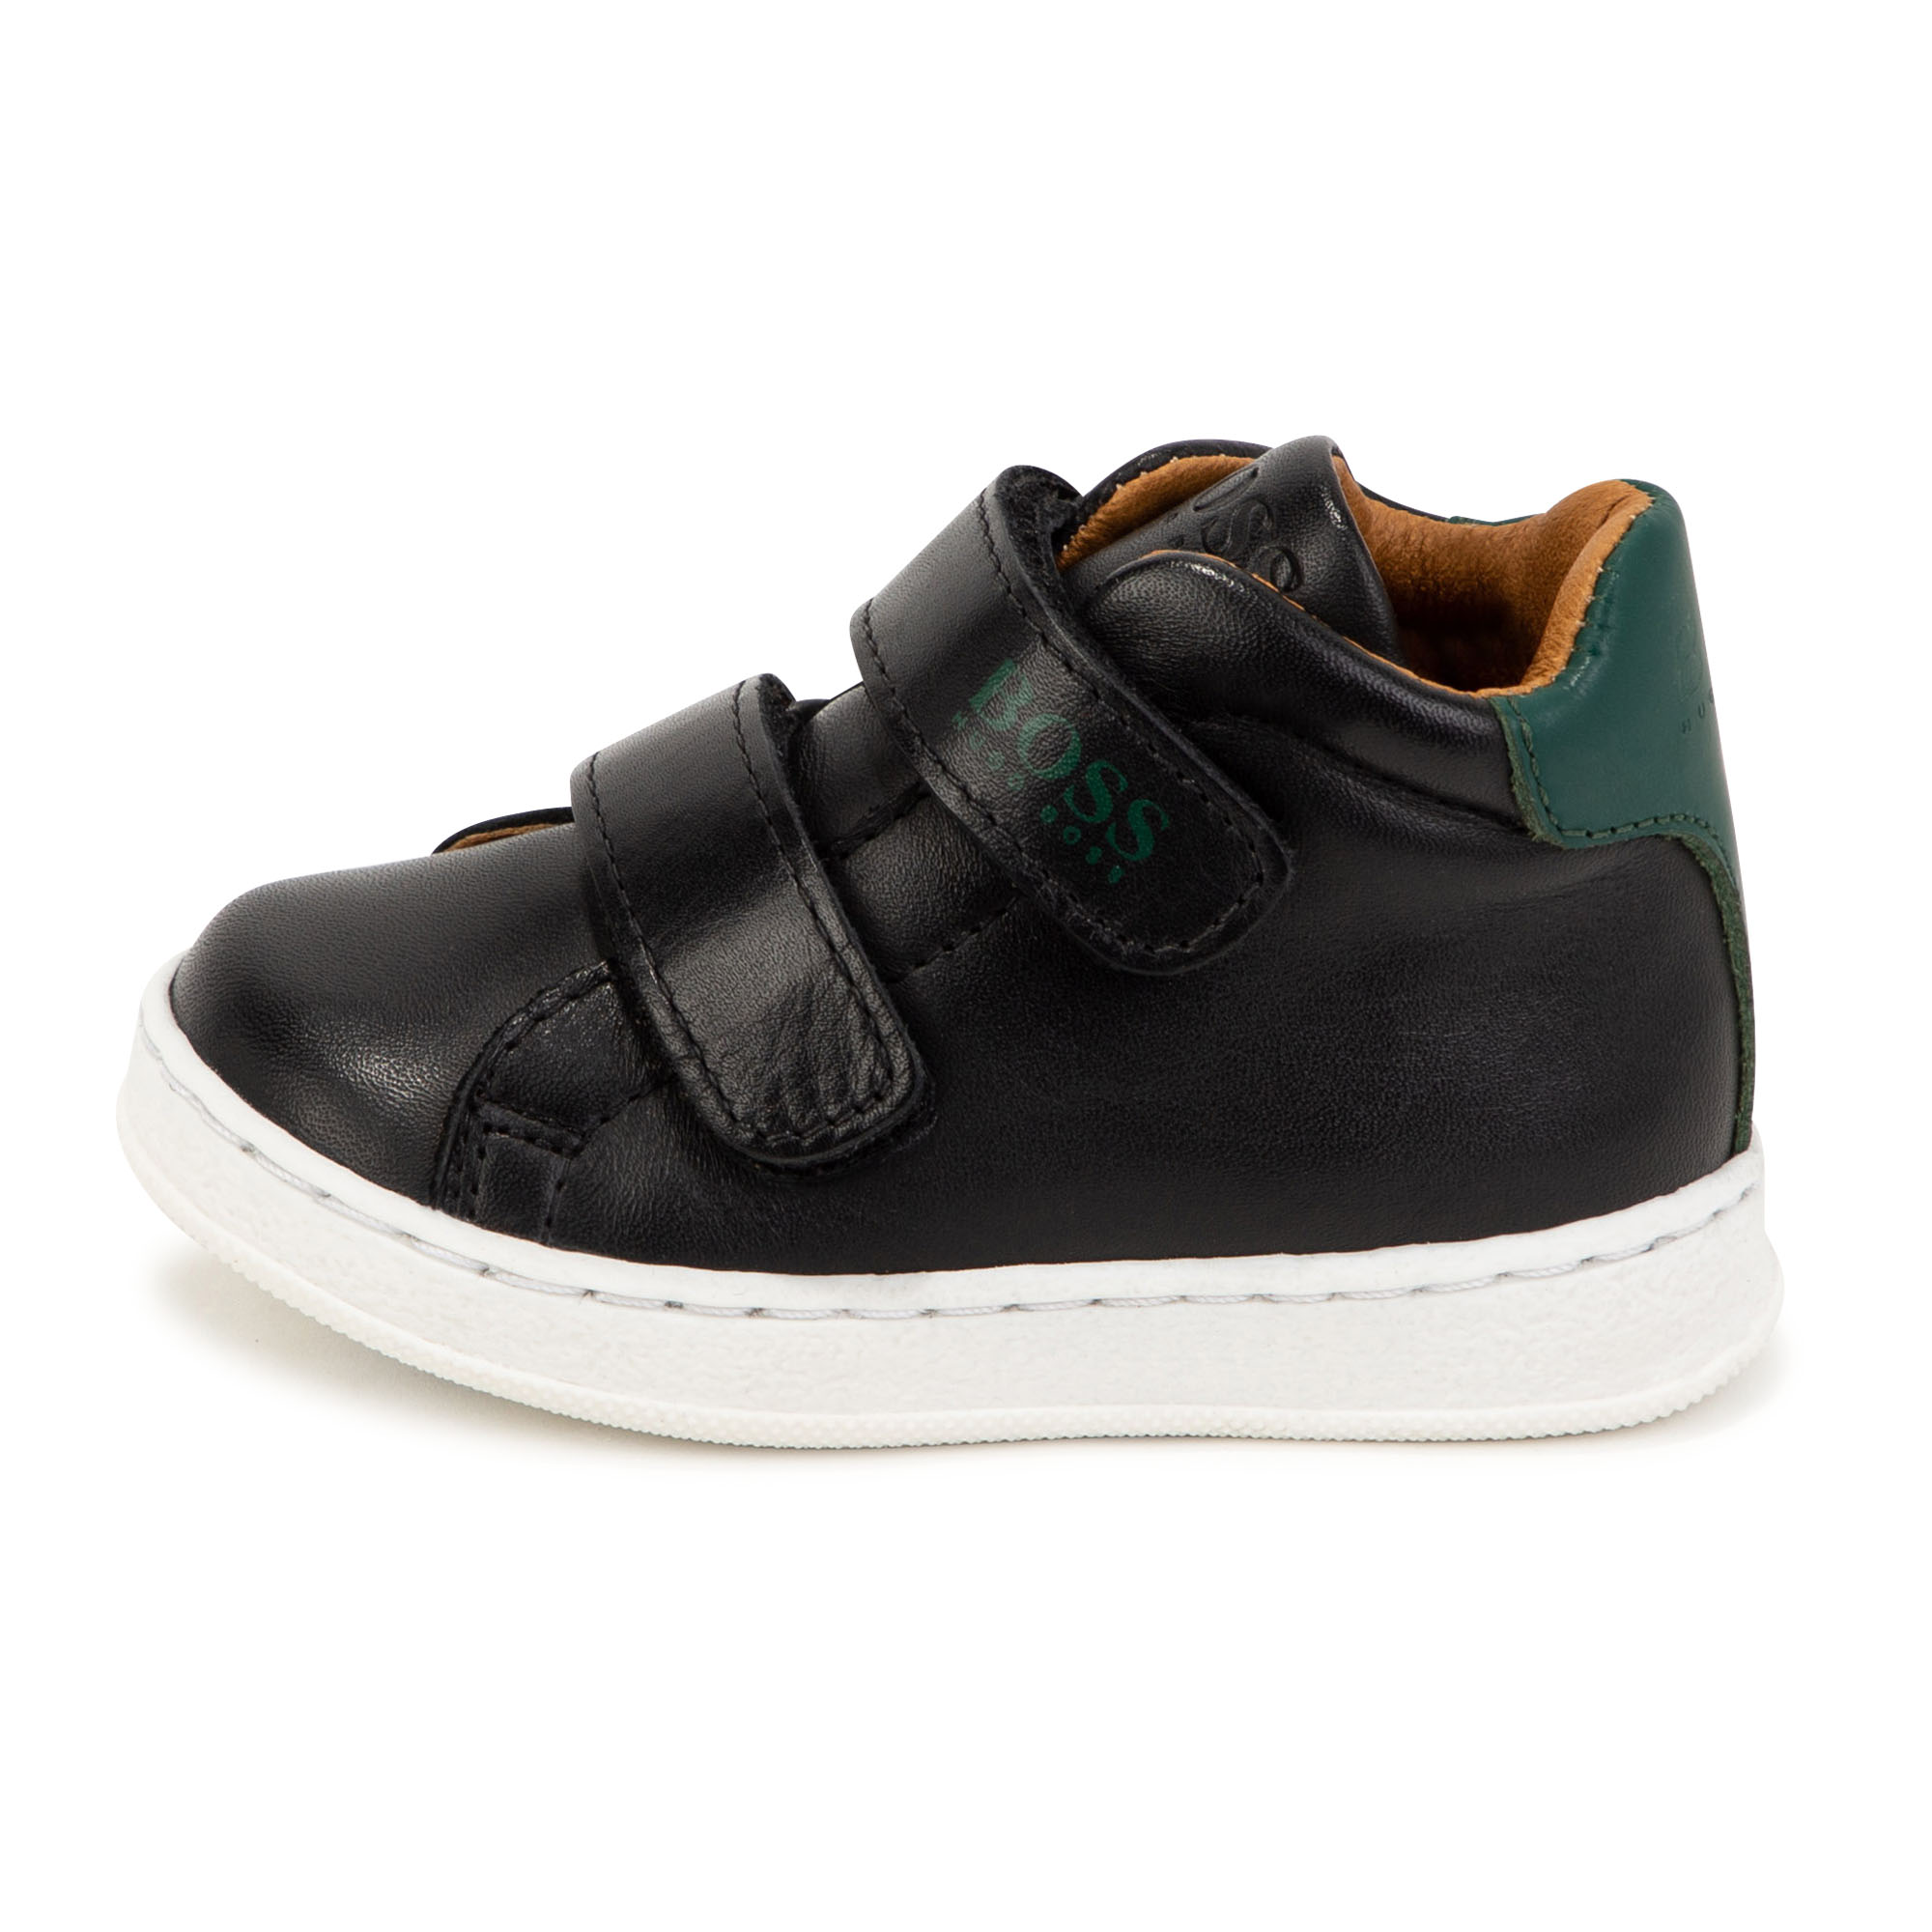 Leather high-top sneakers BOSS for BOY